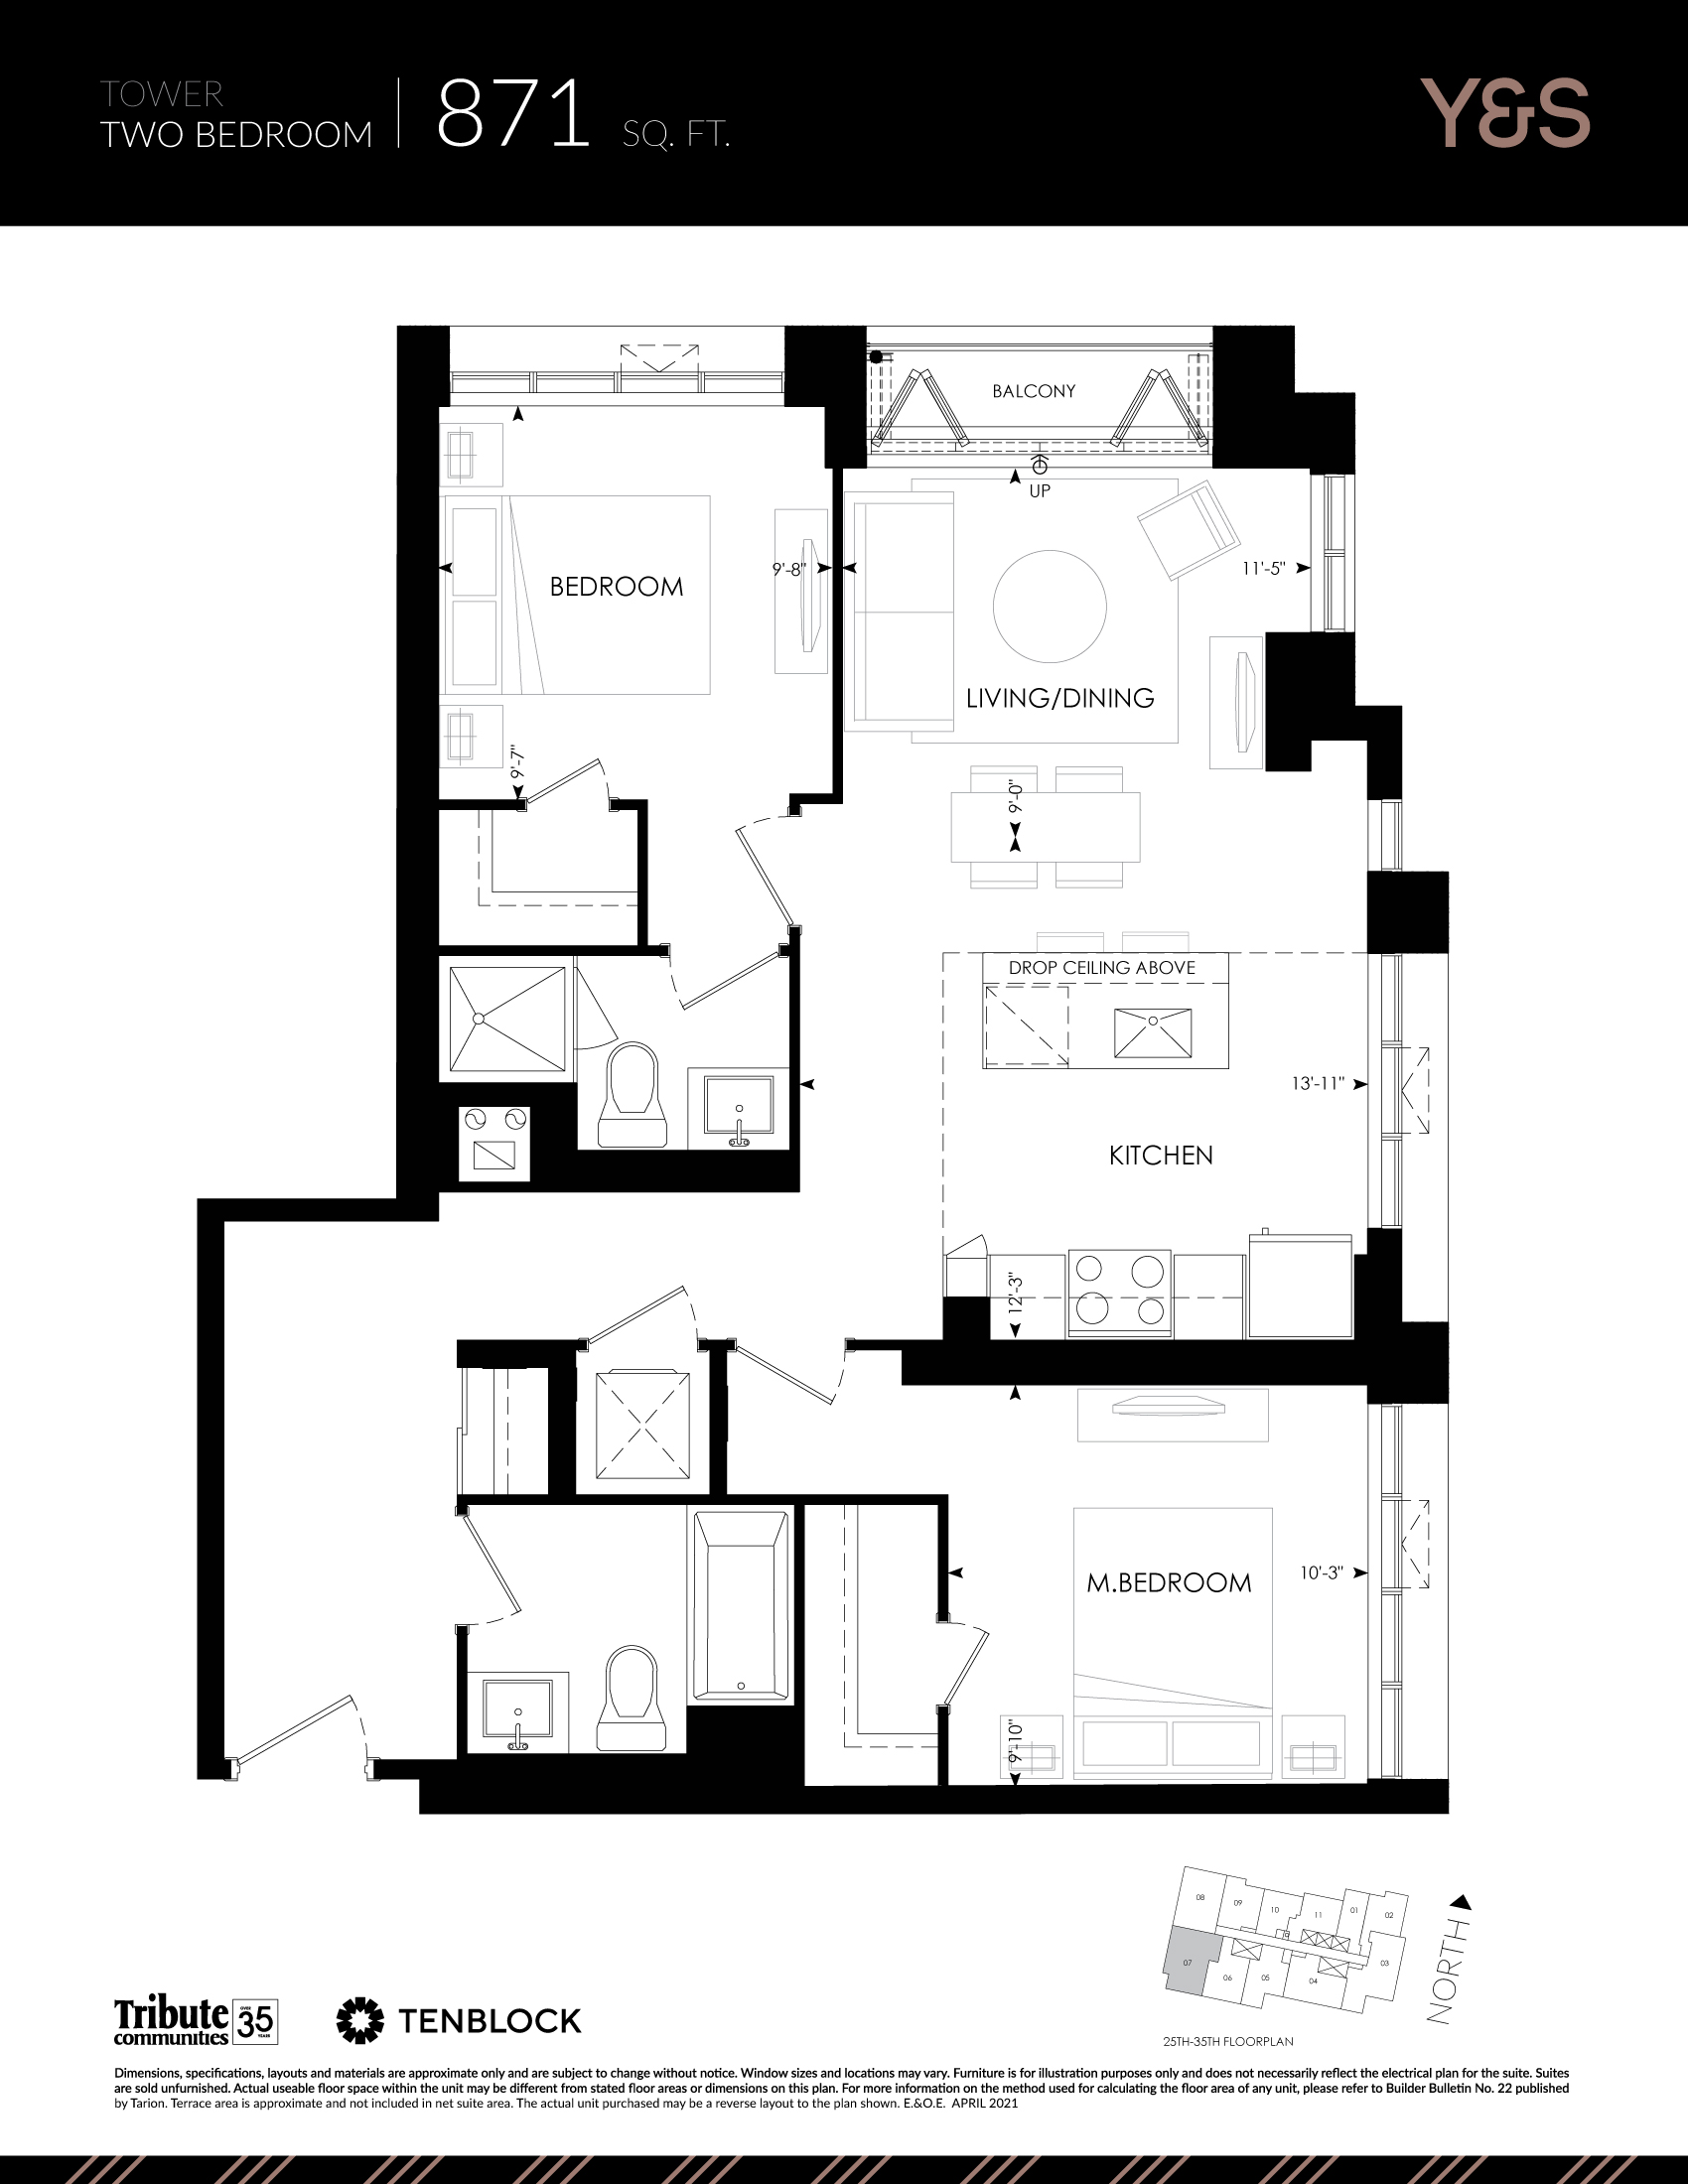 TWO BEDROOM-871 SQ. FT.